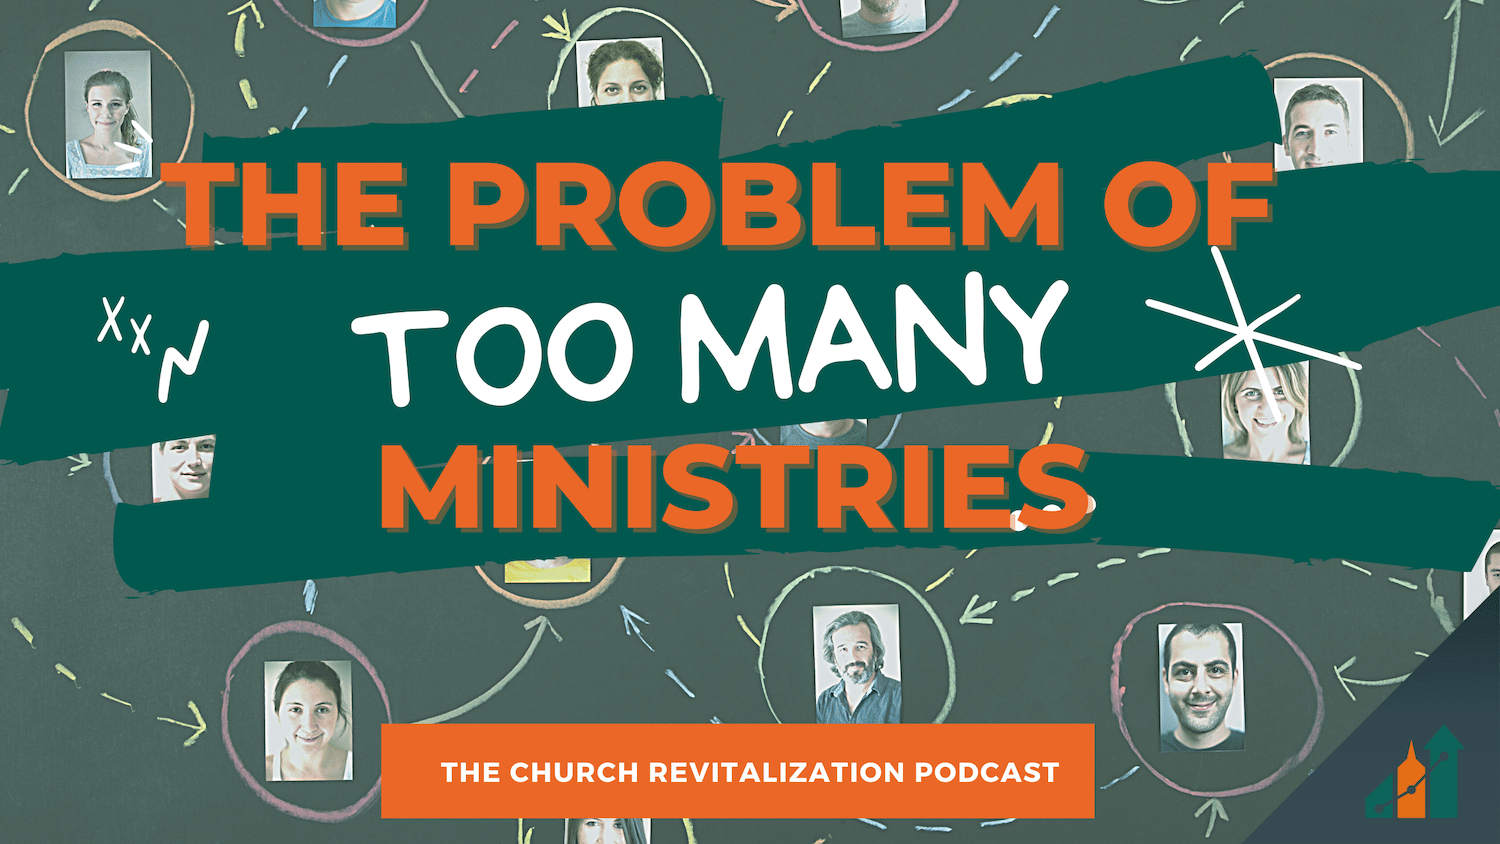 The Problem of Too Many Ministries